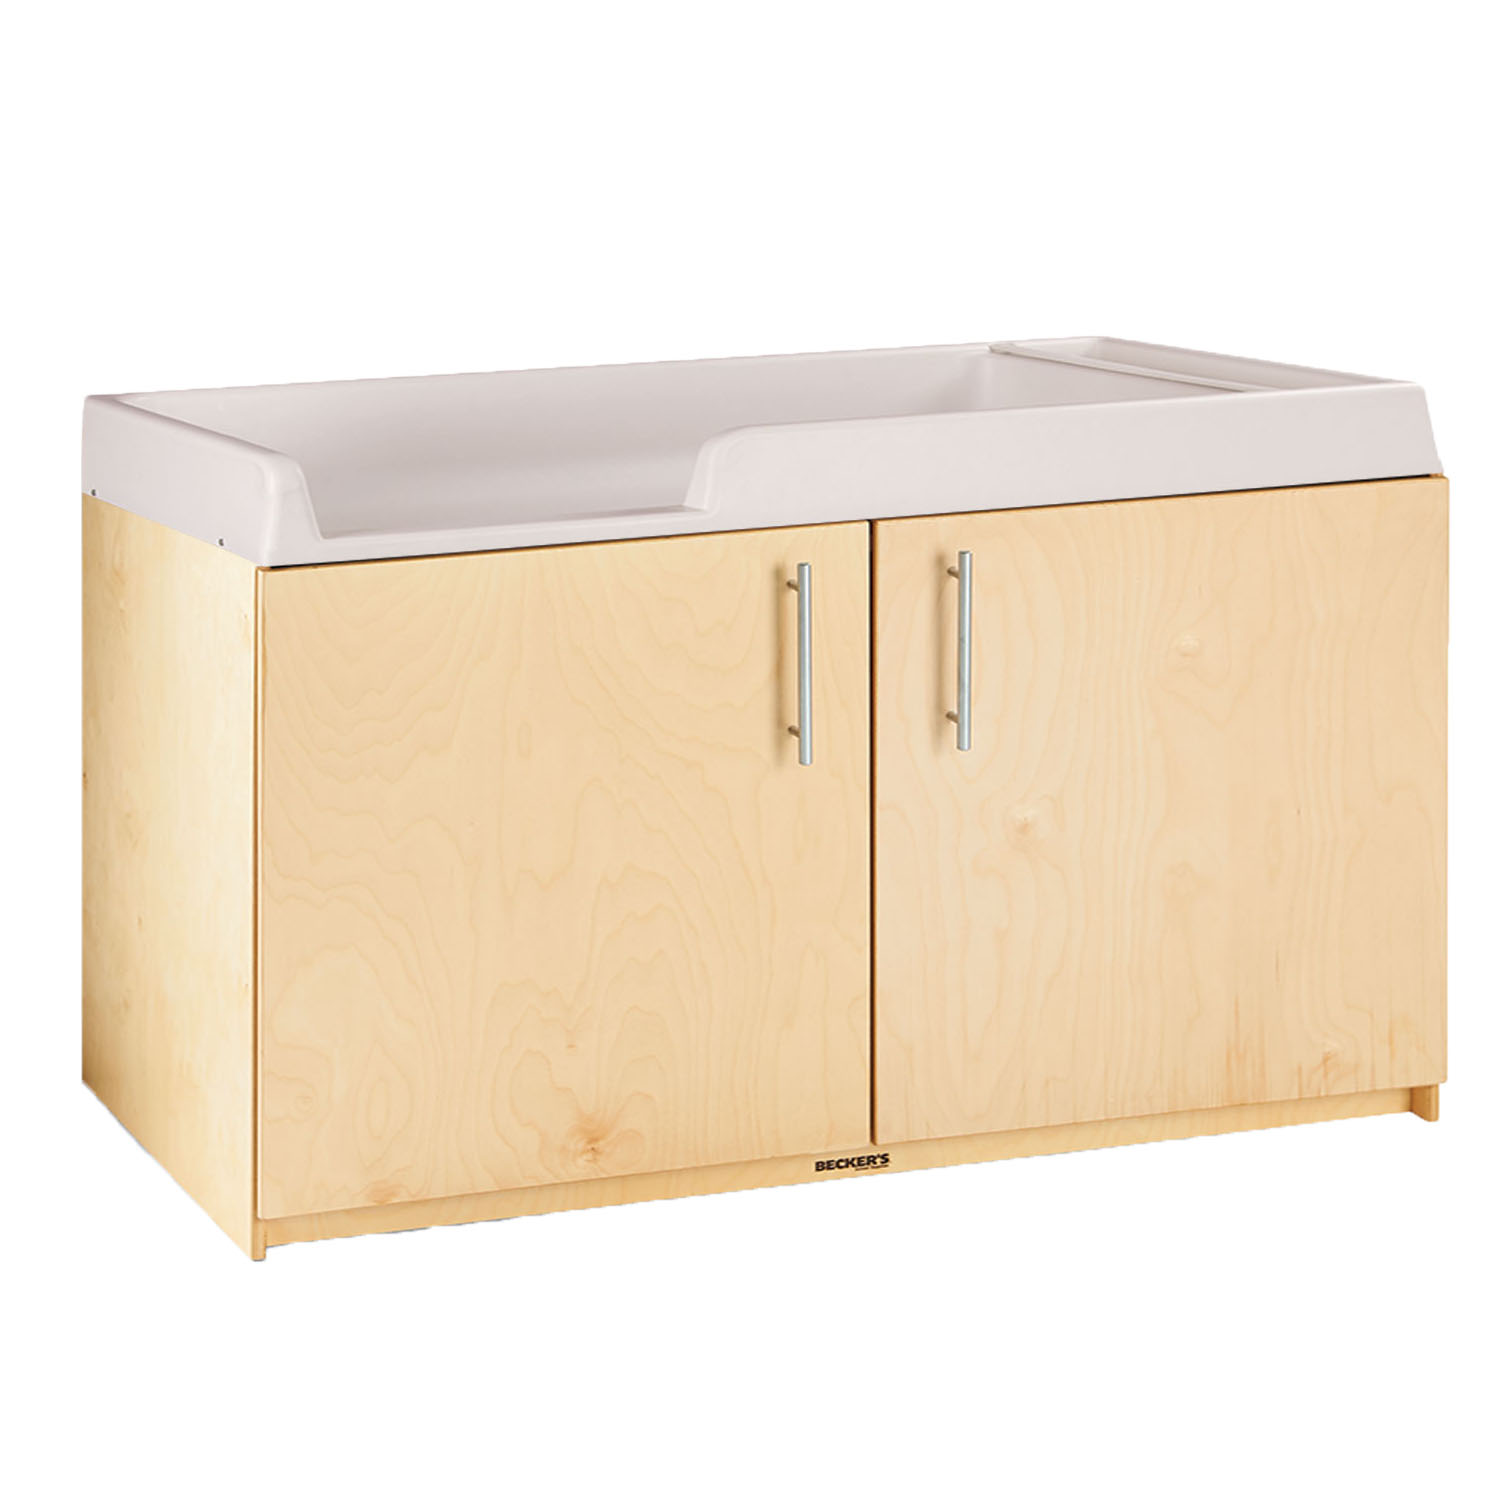 Becker's Premium Changing Table